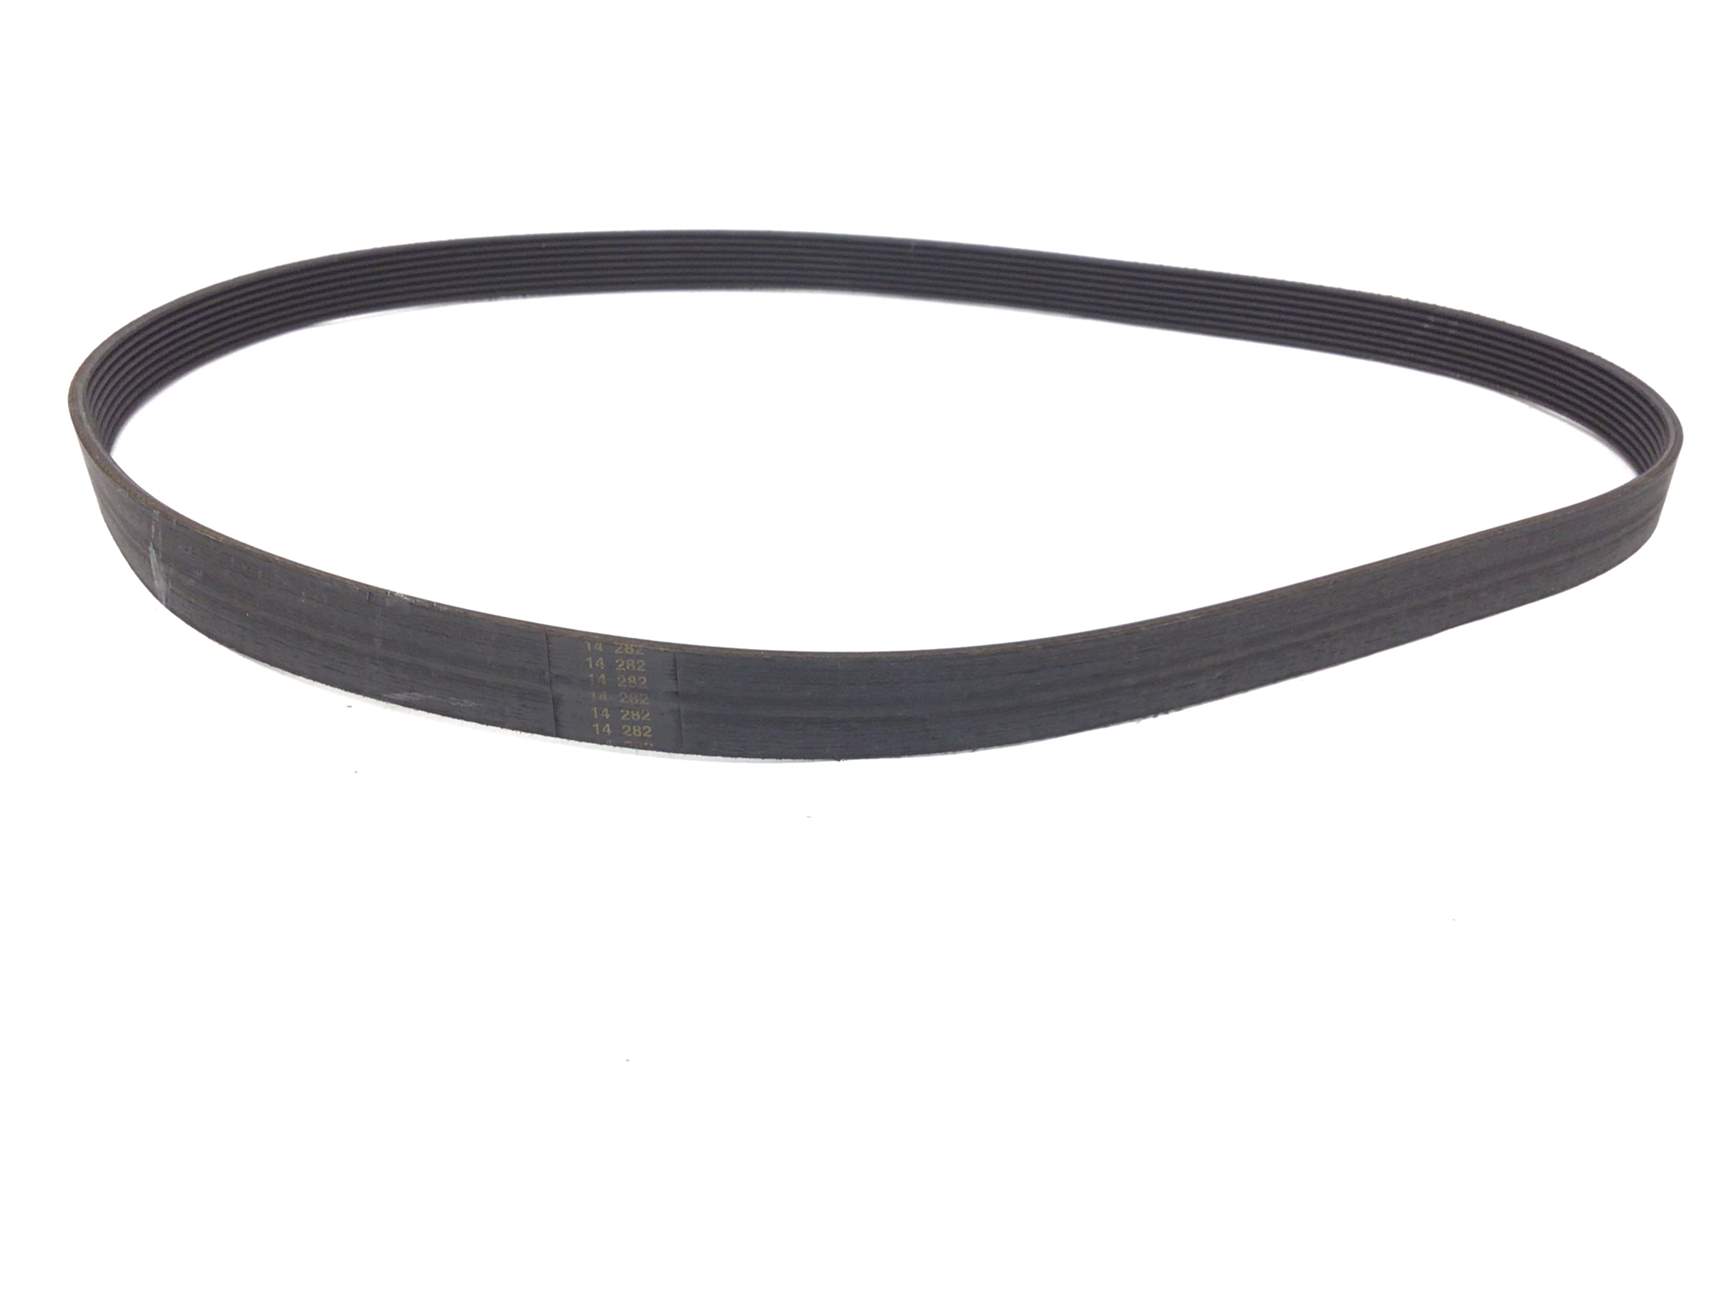 41 Inch Pulley Drive Belt